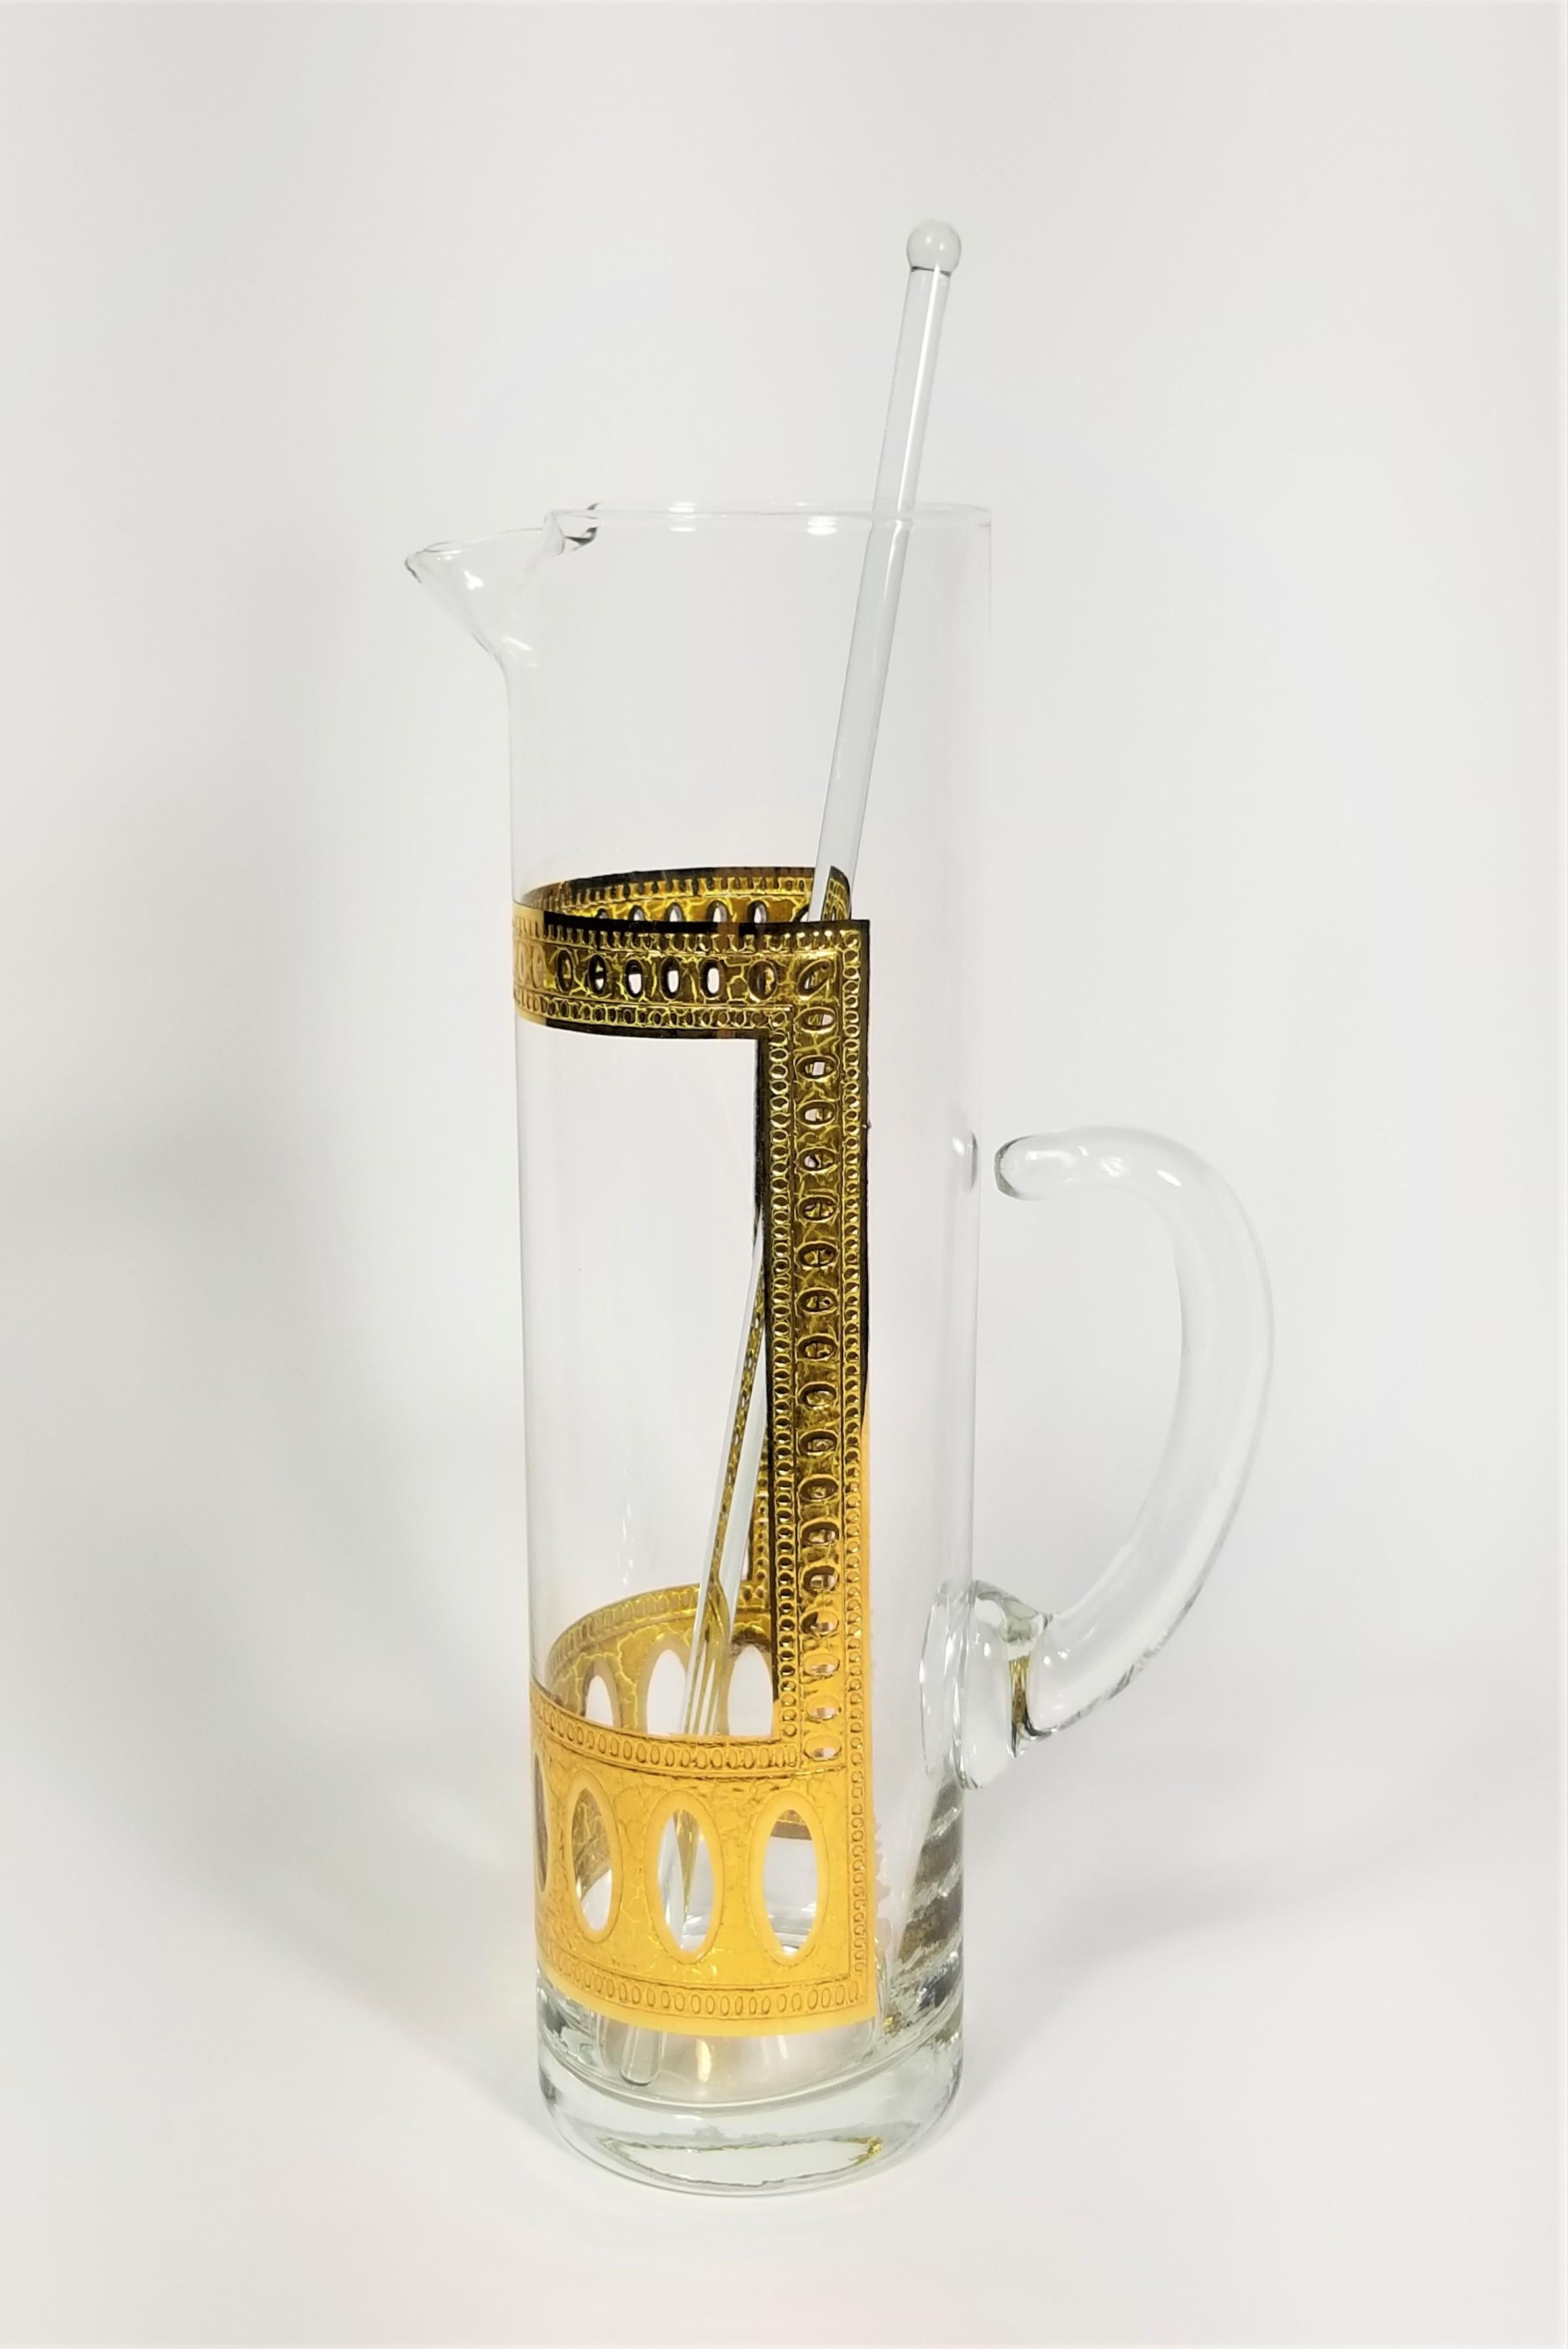 1960s Mid Century Culver 22K gold Martini pitcher with glass stirrer. 

Measurements:
Pitcher Height: 11.0 inches
Pitcher Diameter: 5.5 inches
Stirrer Height12.5 inches
Stirrer Diameter: 0.25 inches.